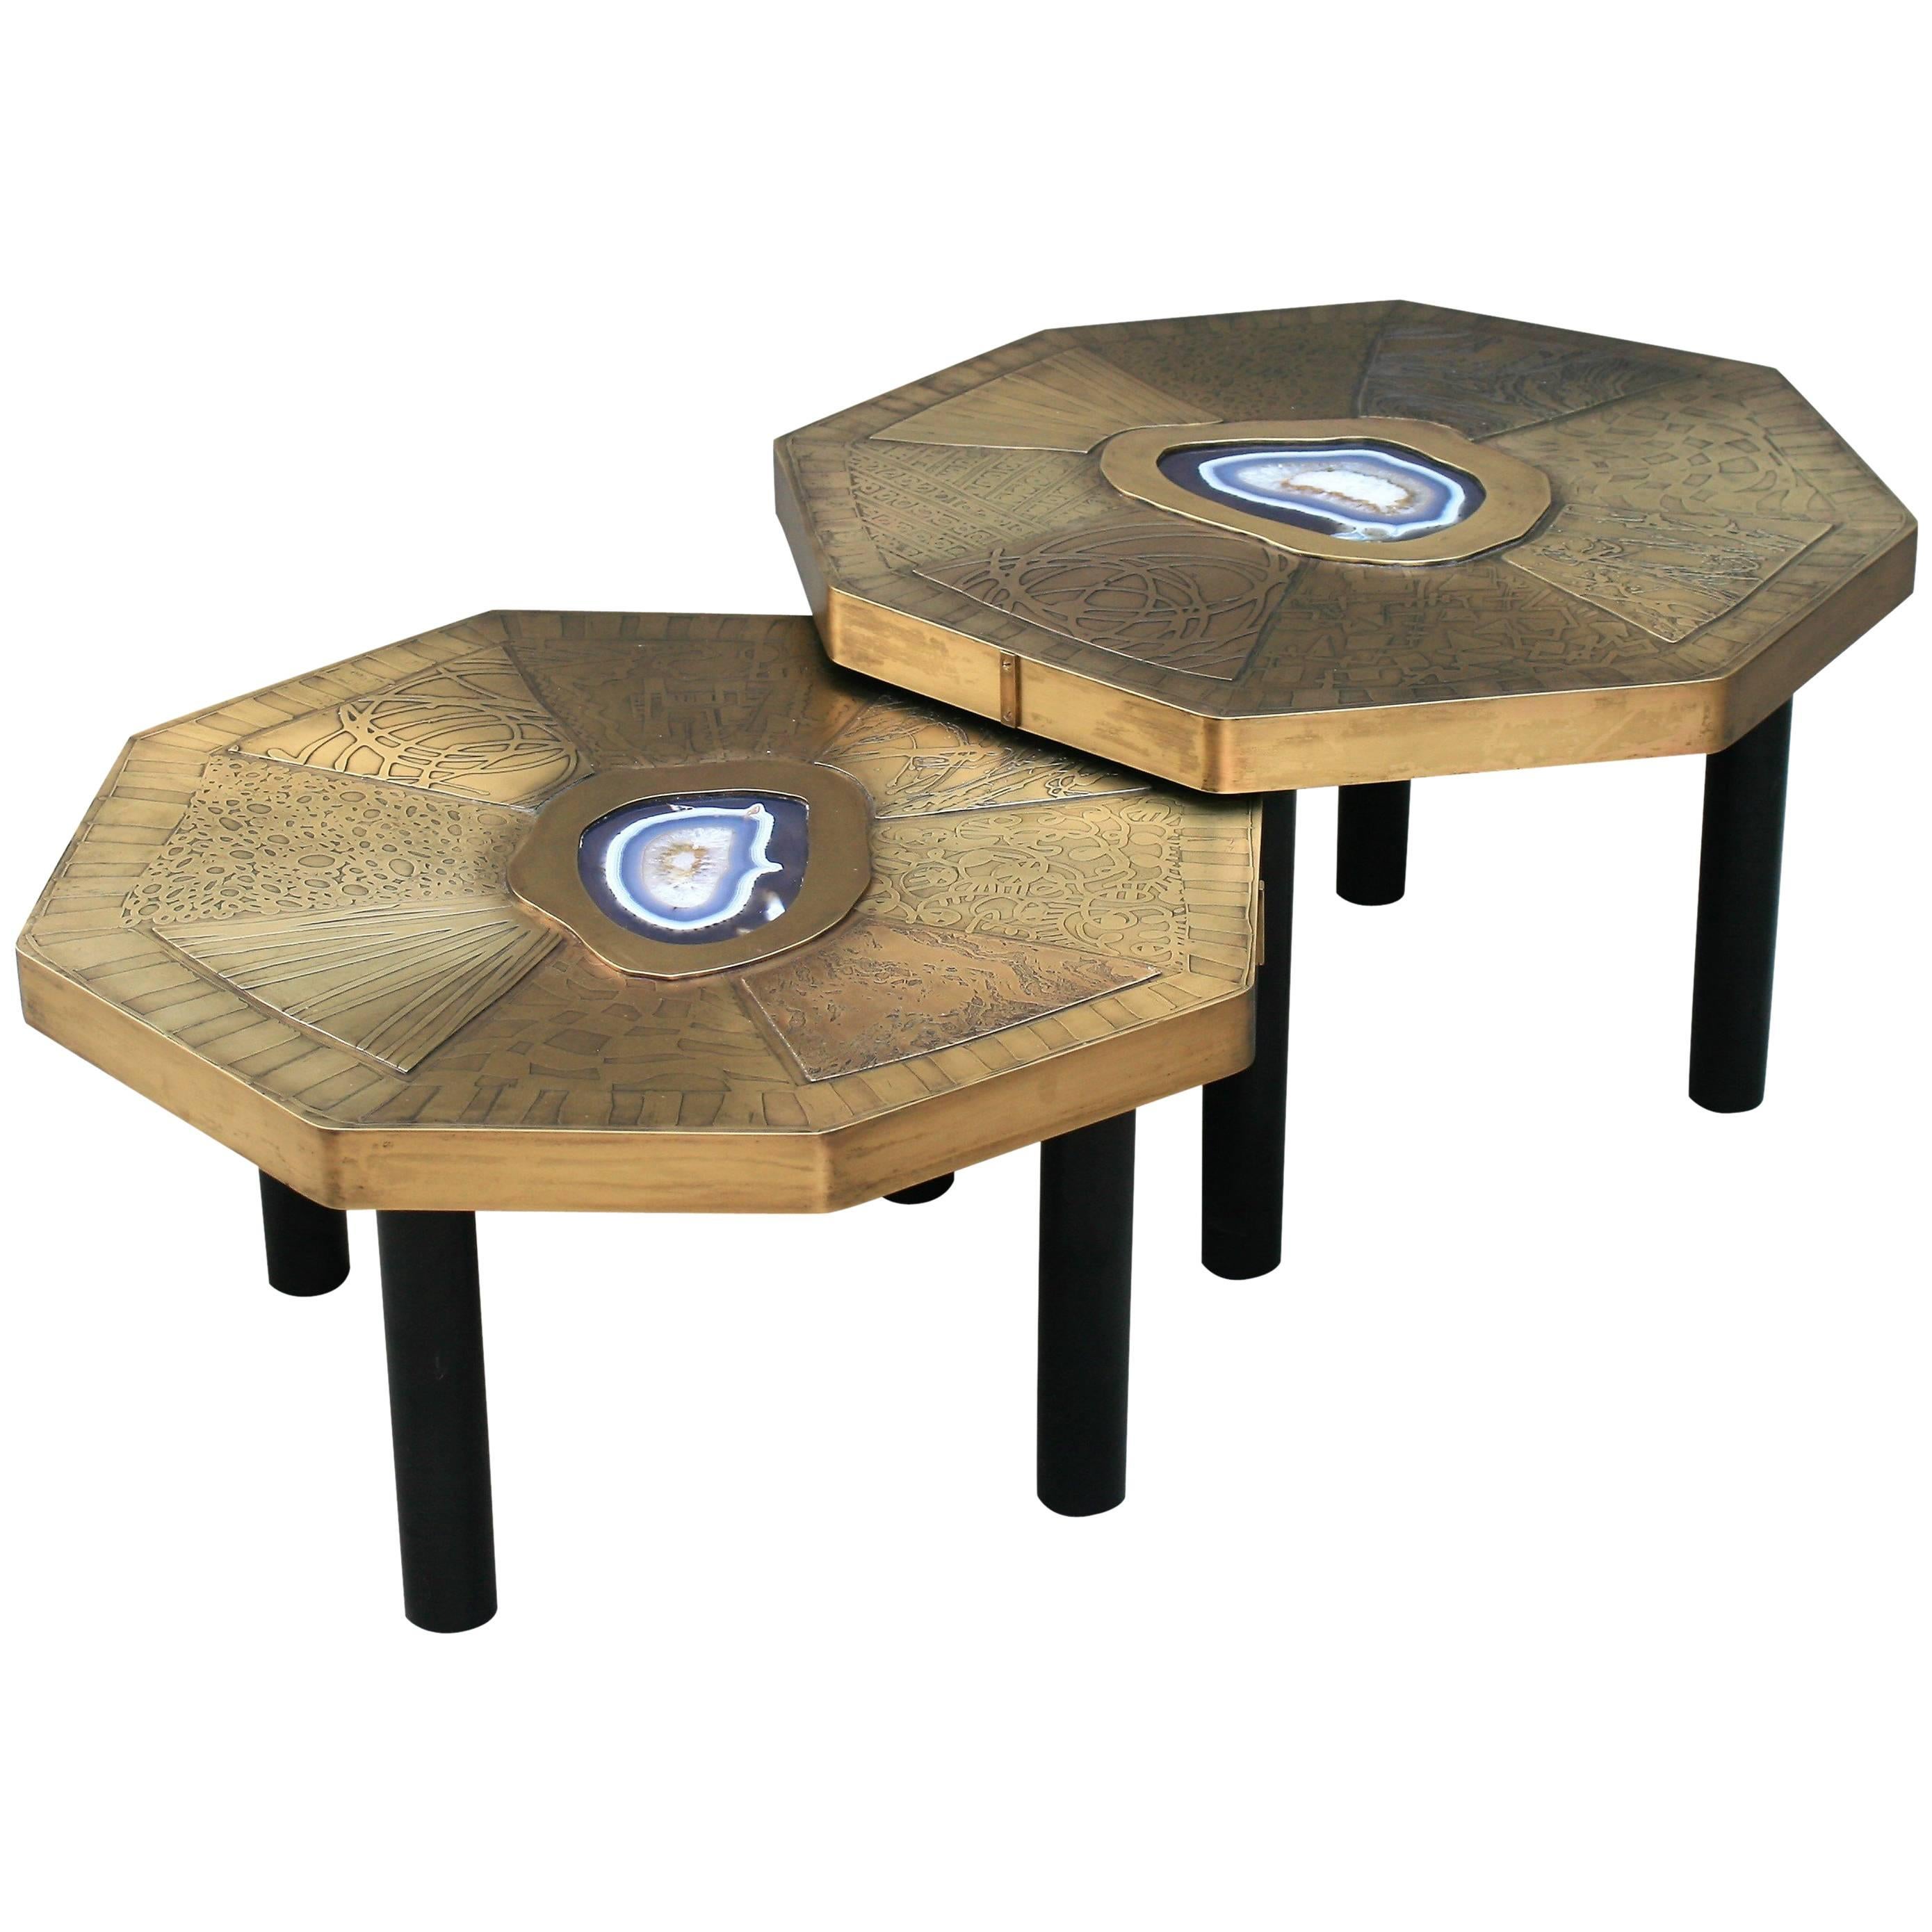 Two Octagonal Coffee Tables, Patinated Acid Etched Brass and Agate Slices